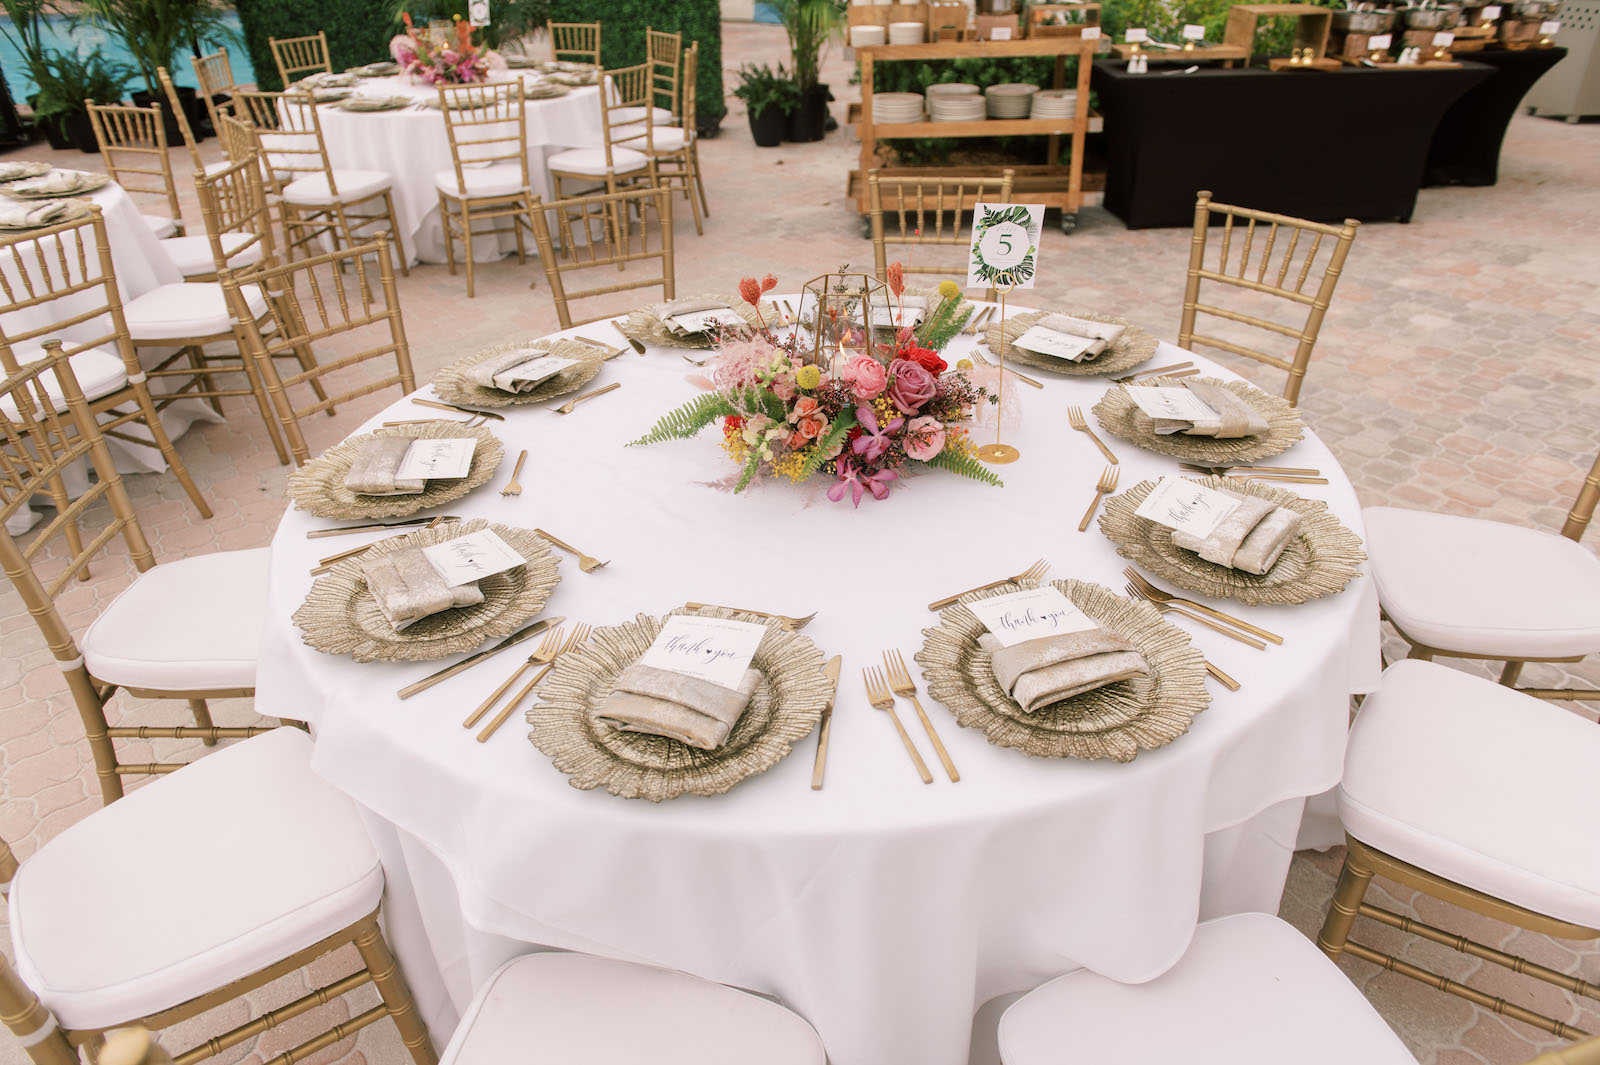 Vibrant Boho Wedding Reception Decor, White Linen Round Tables, Gold Chargers and Flatware, Low Hot Pink, Yellow and Greenery Floral Centerpiece